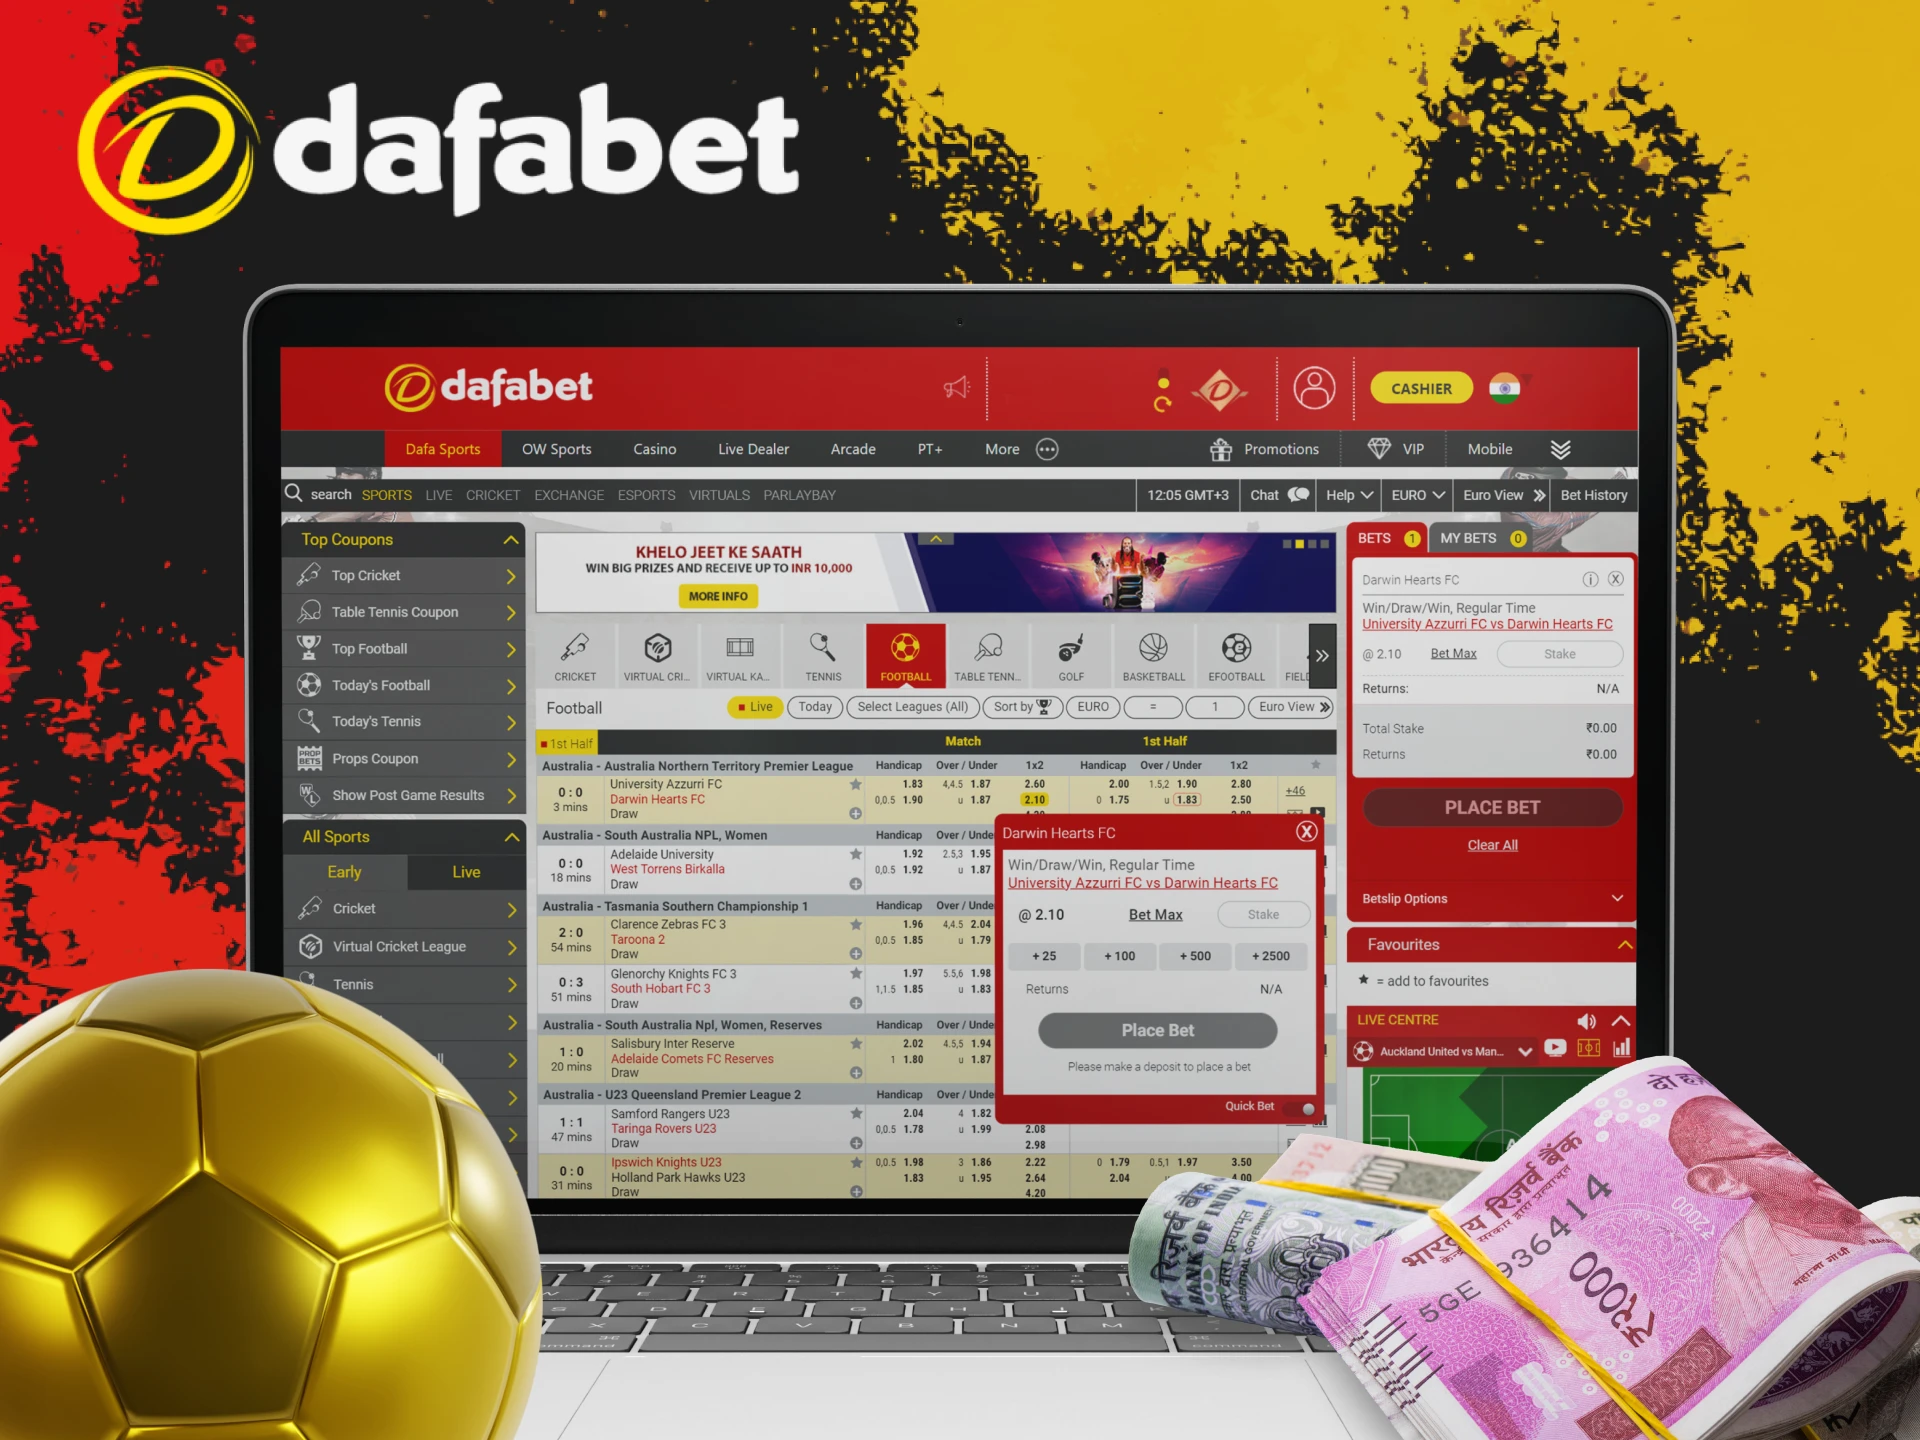 Place a bet on football at Dafabet and wait for the results.